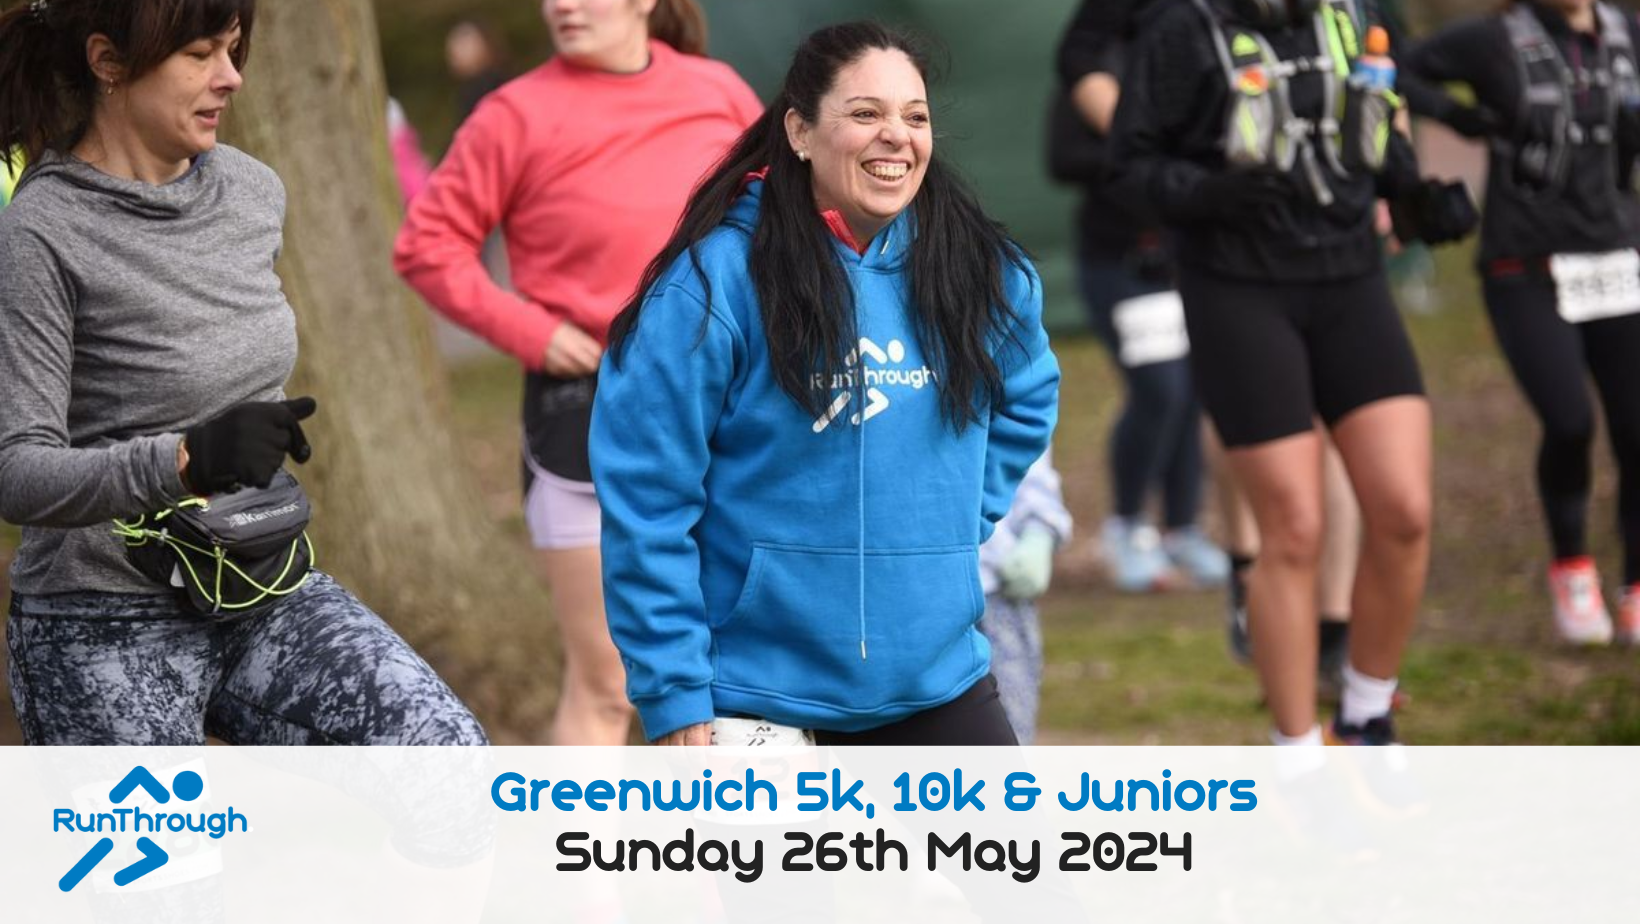 Image for RunThrough Greenwich Park 5k